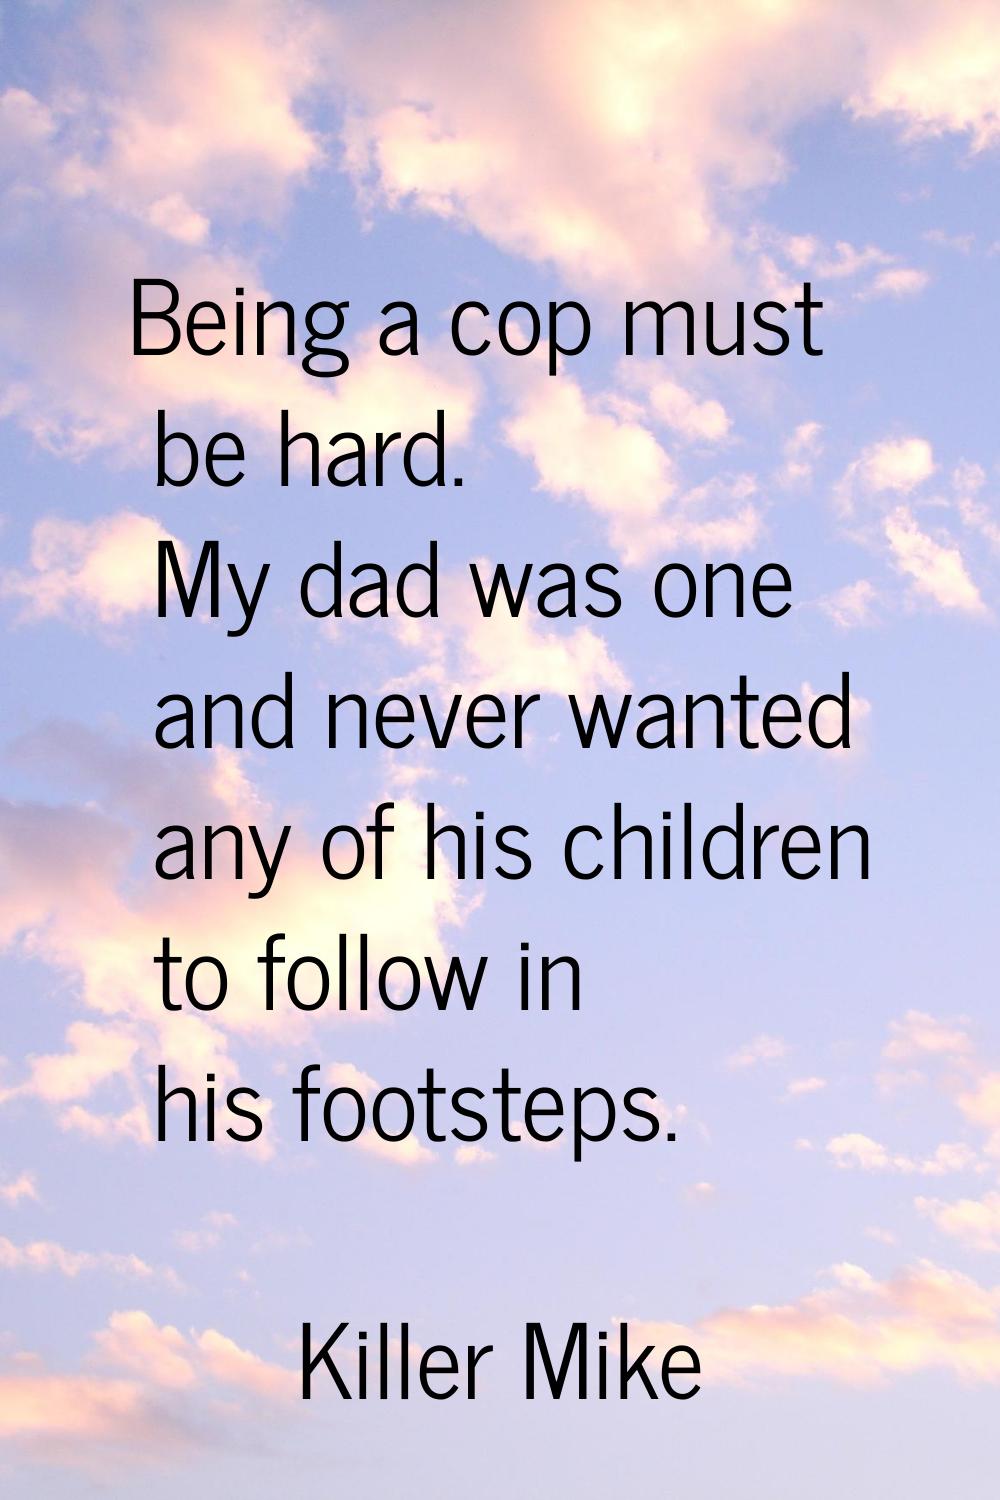 Being a cop must be hard. My dad was one and never wanted any of his children to follow in his foot